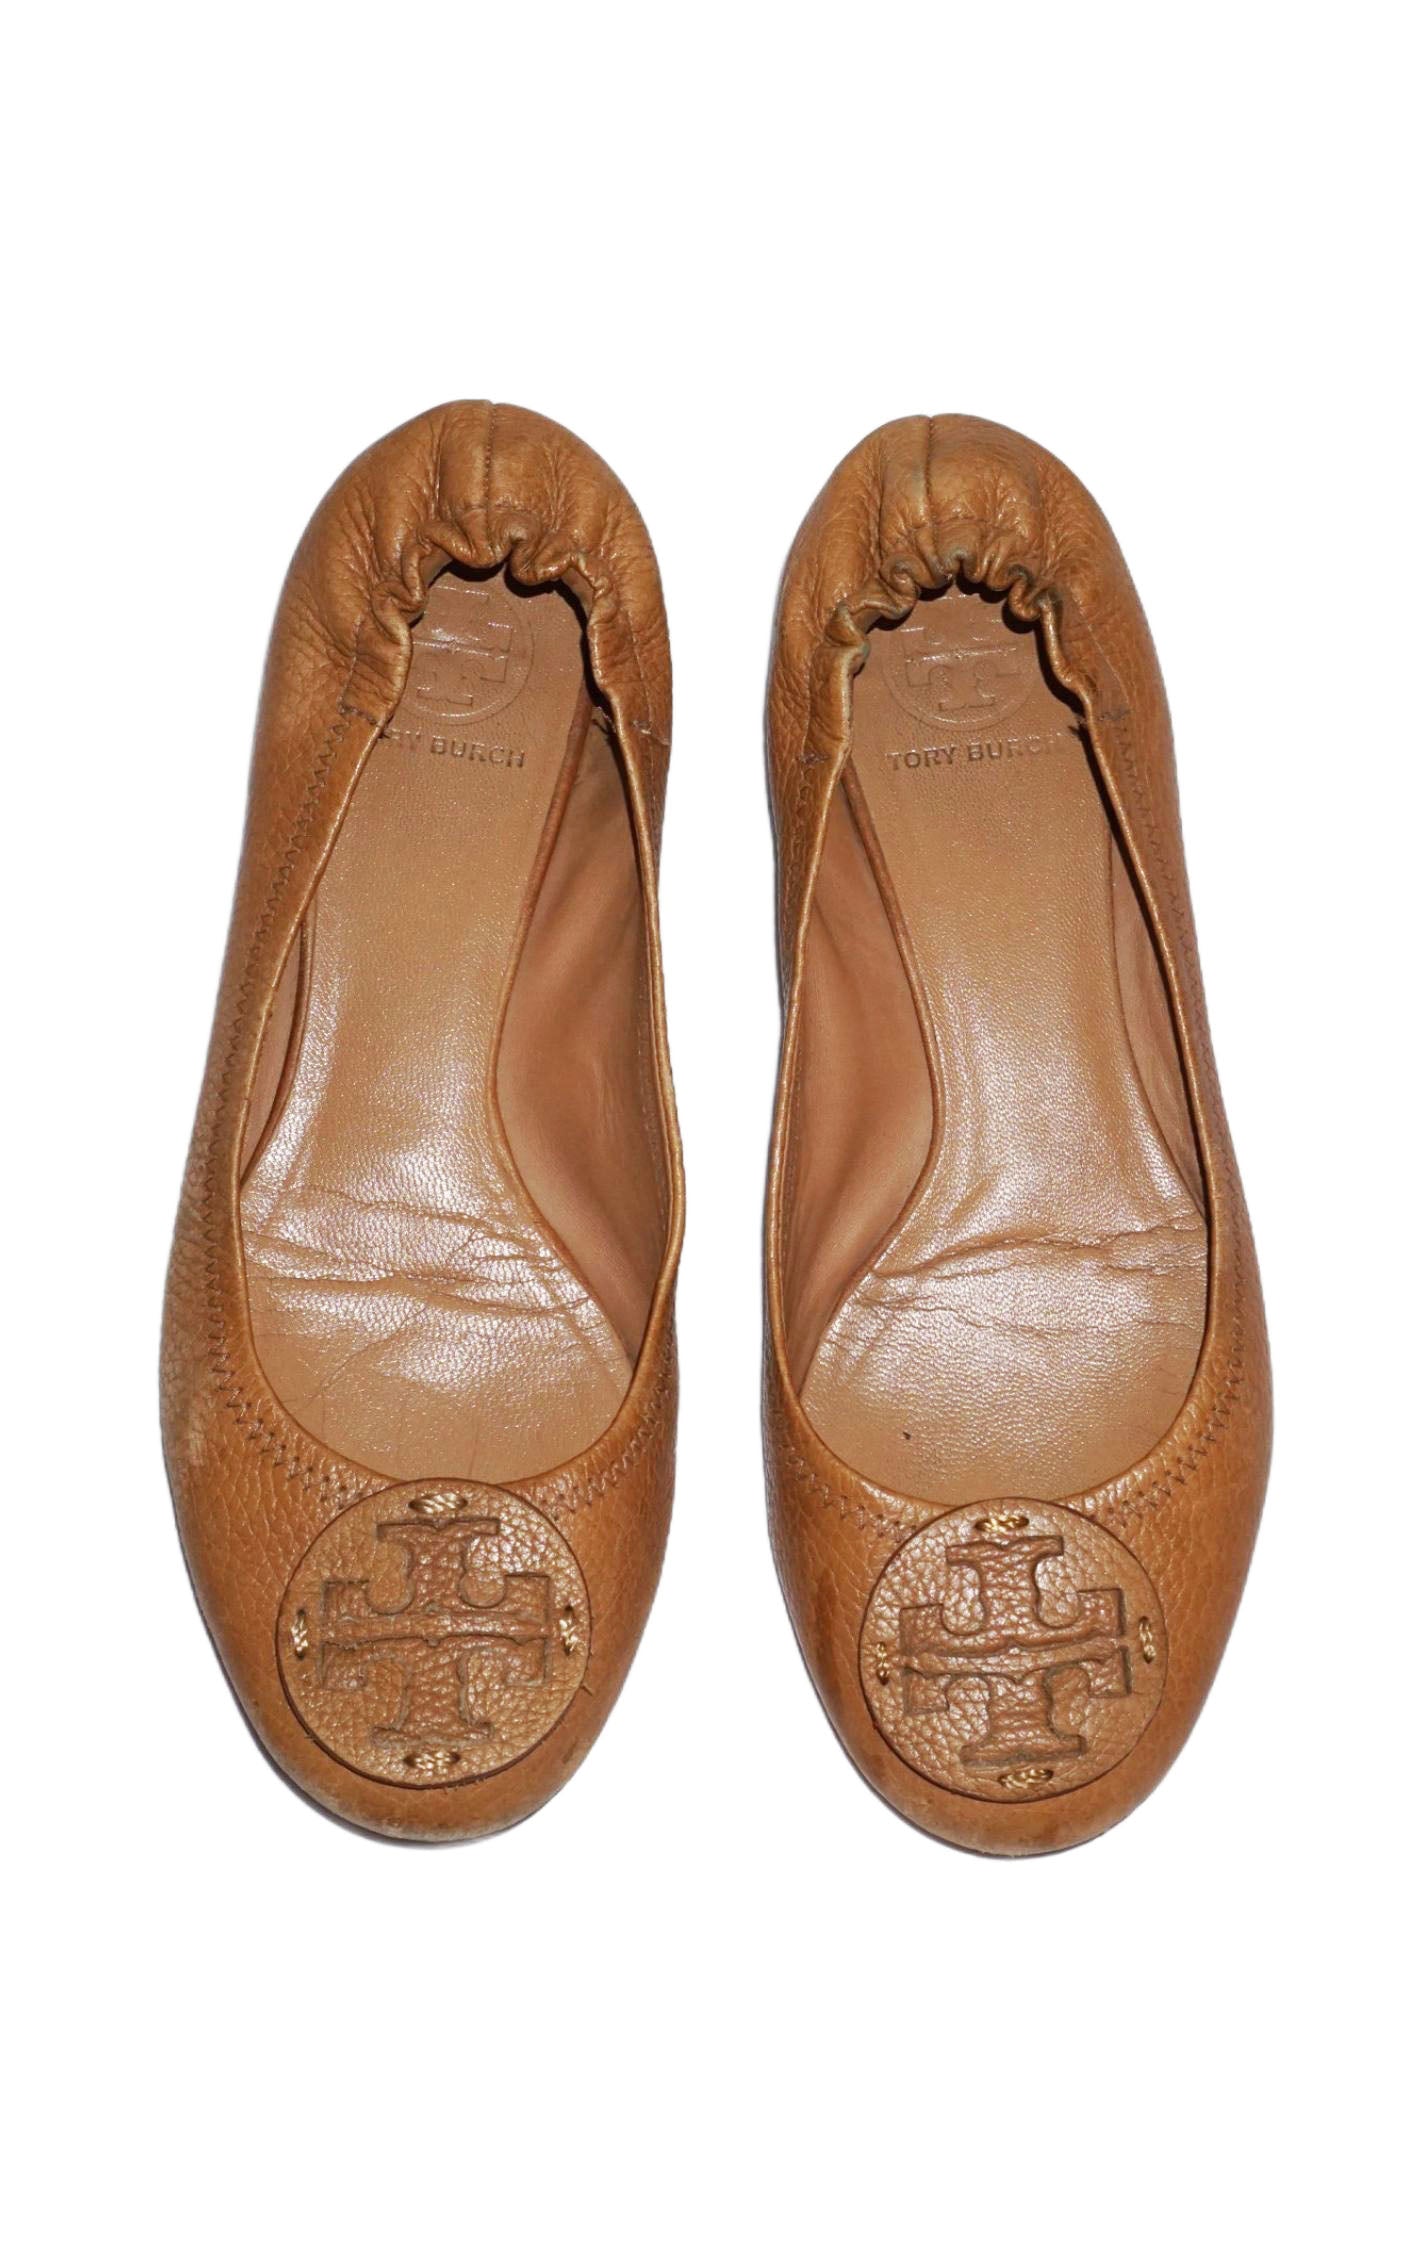 TORY BURCH Minnie Travel Brown Leather Ballet Flat Shoes resellum